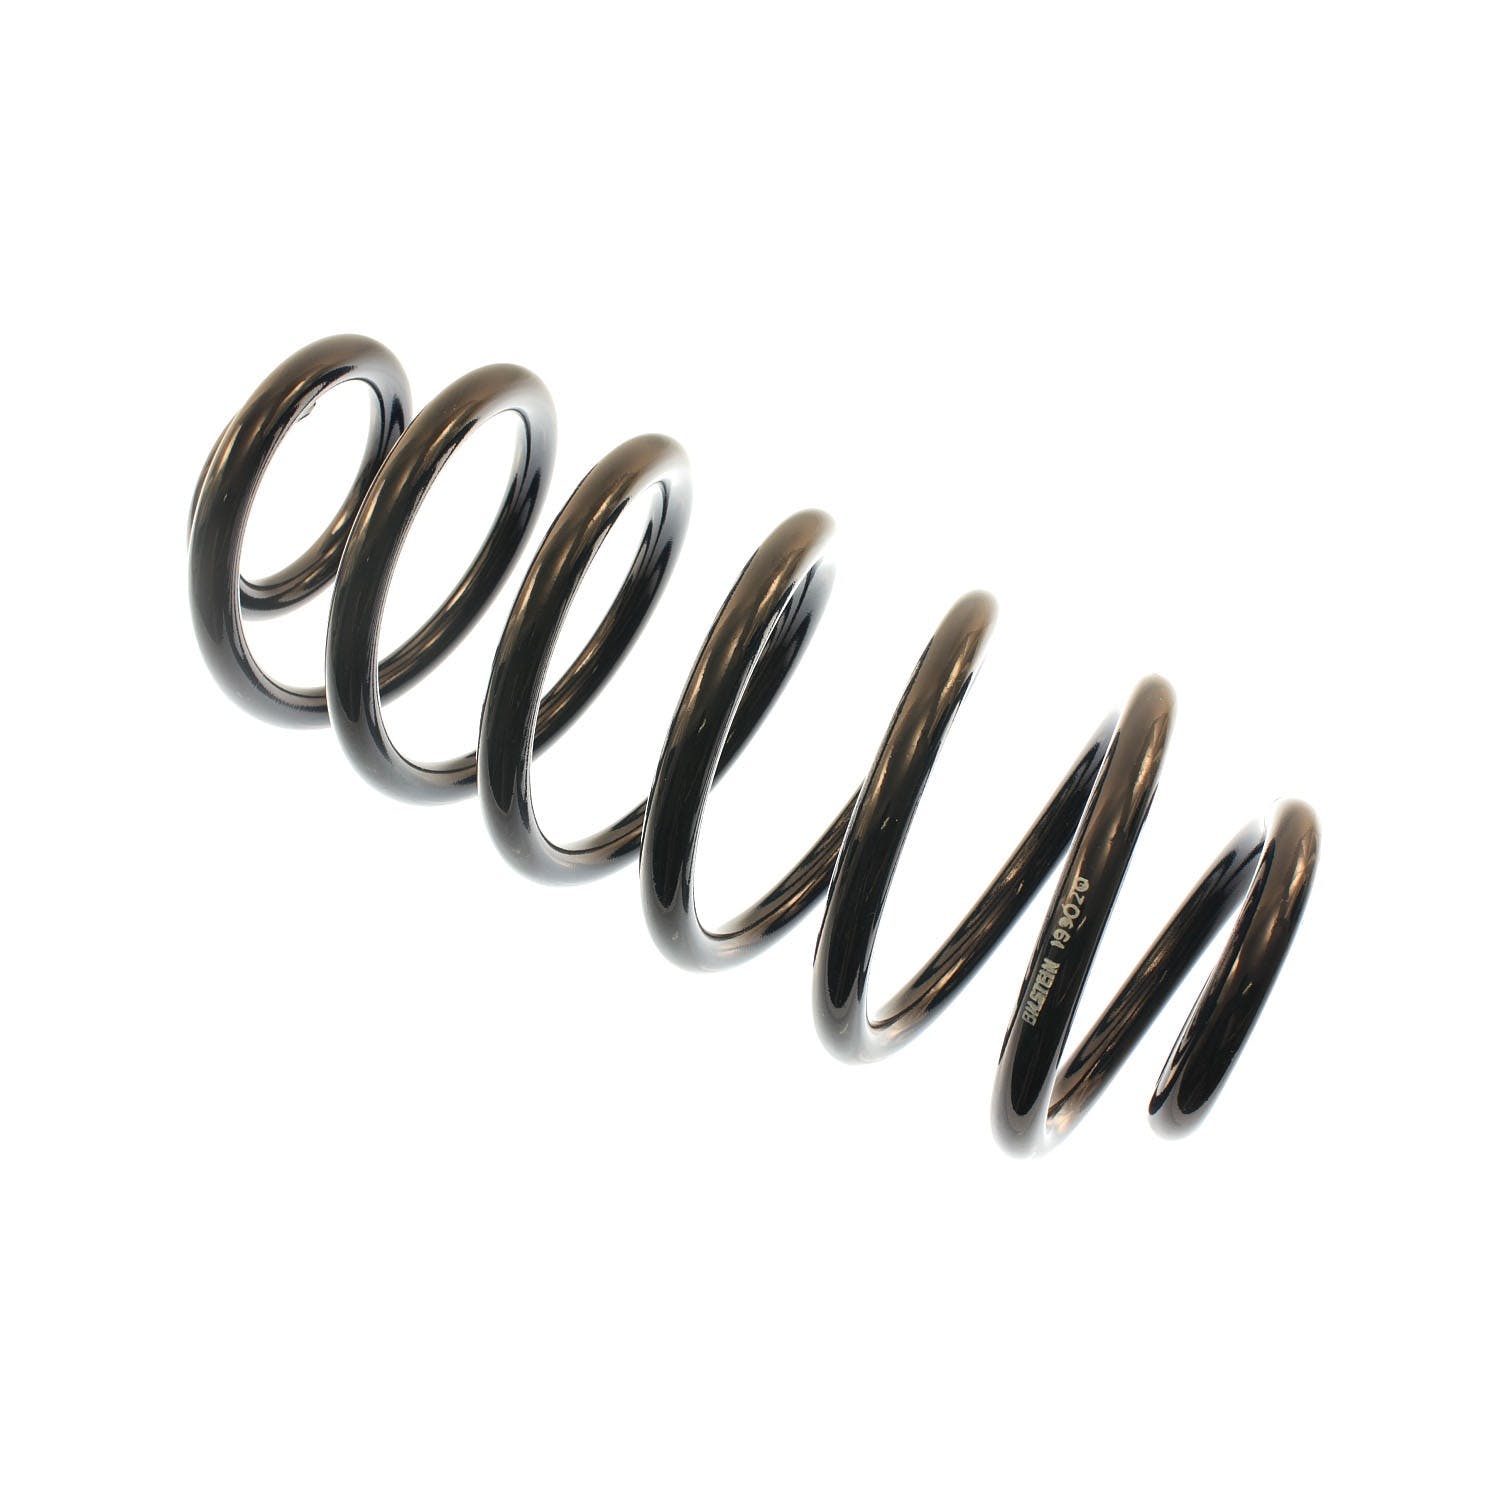 Bilstein 199020 B3 OE Replacement Coil Springs